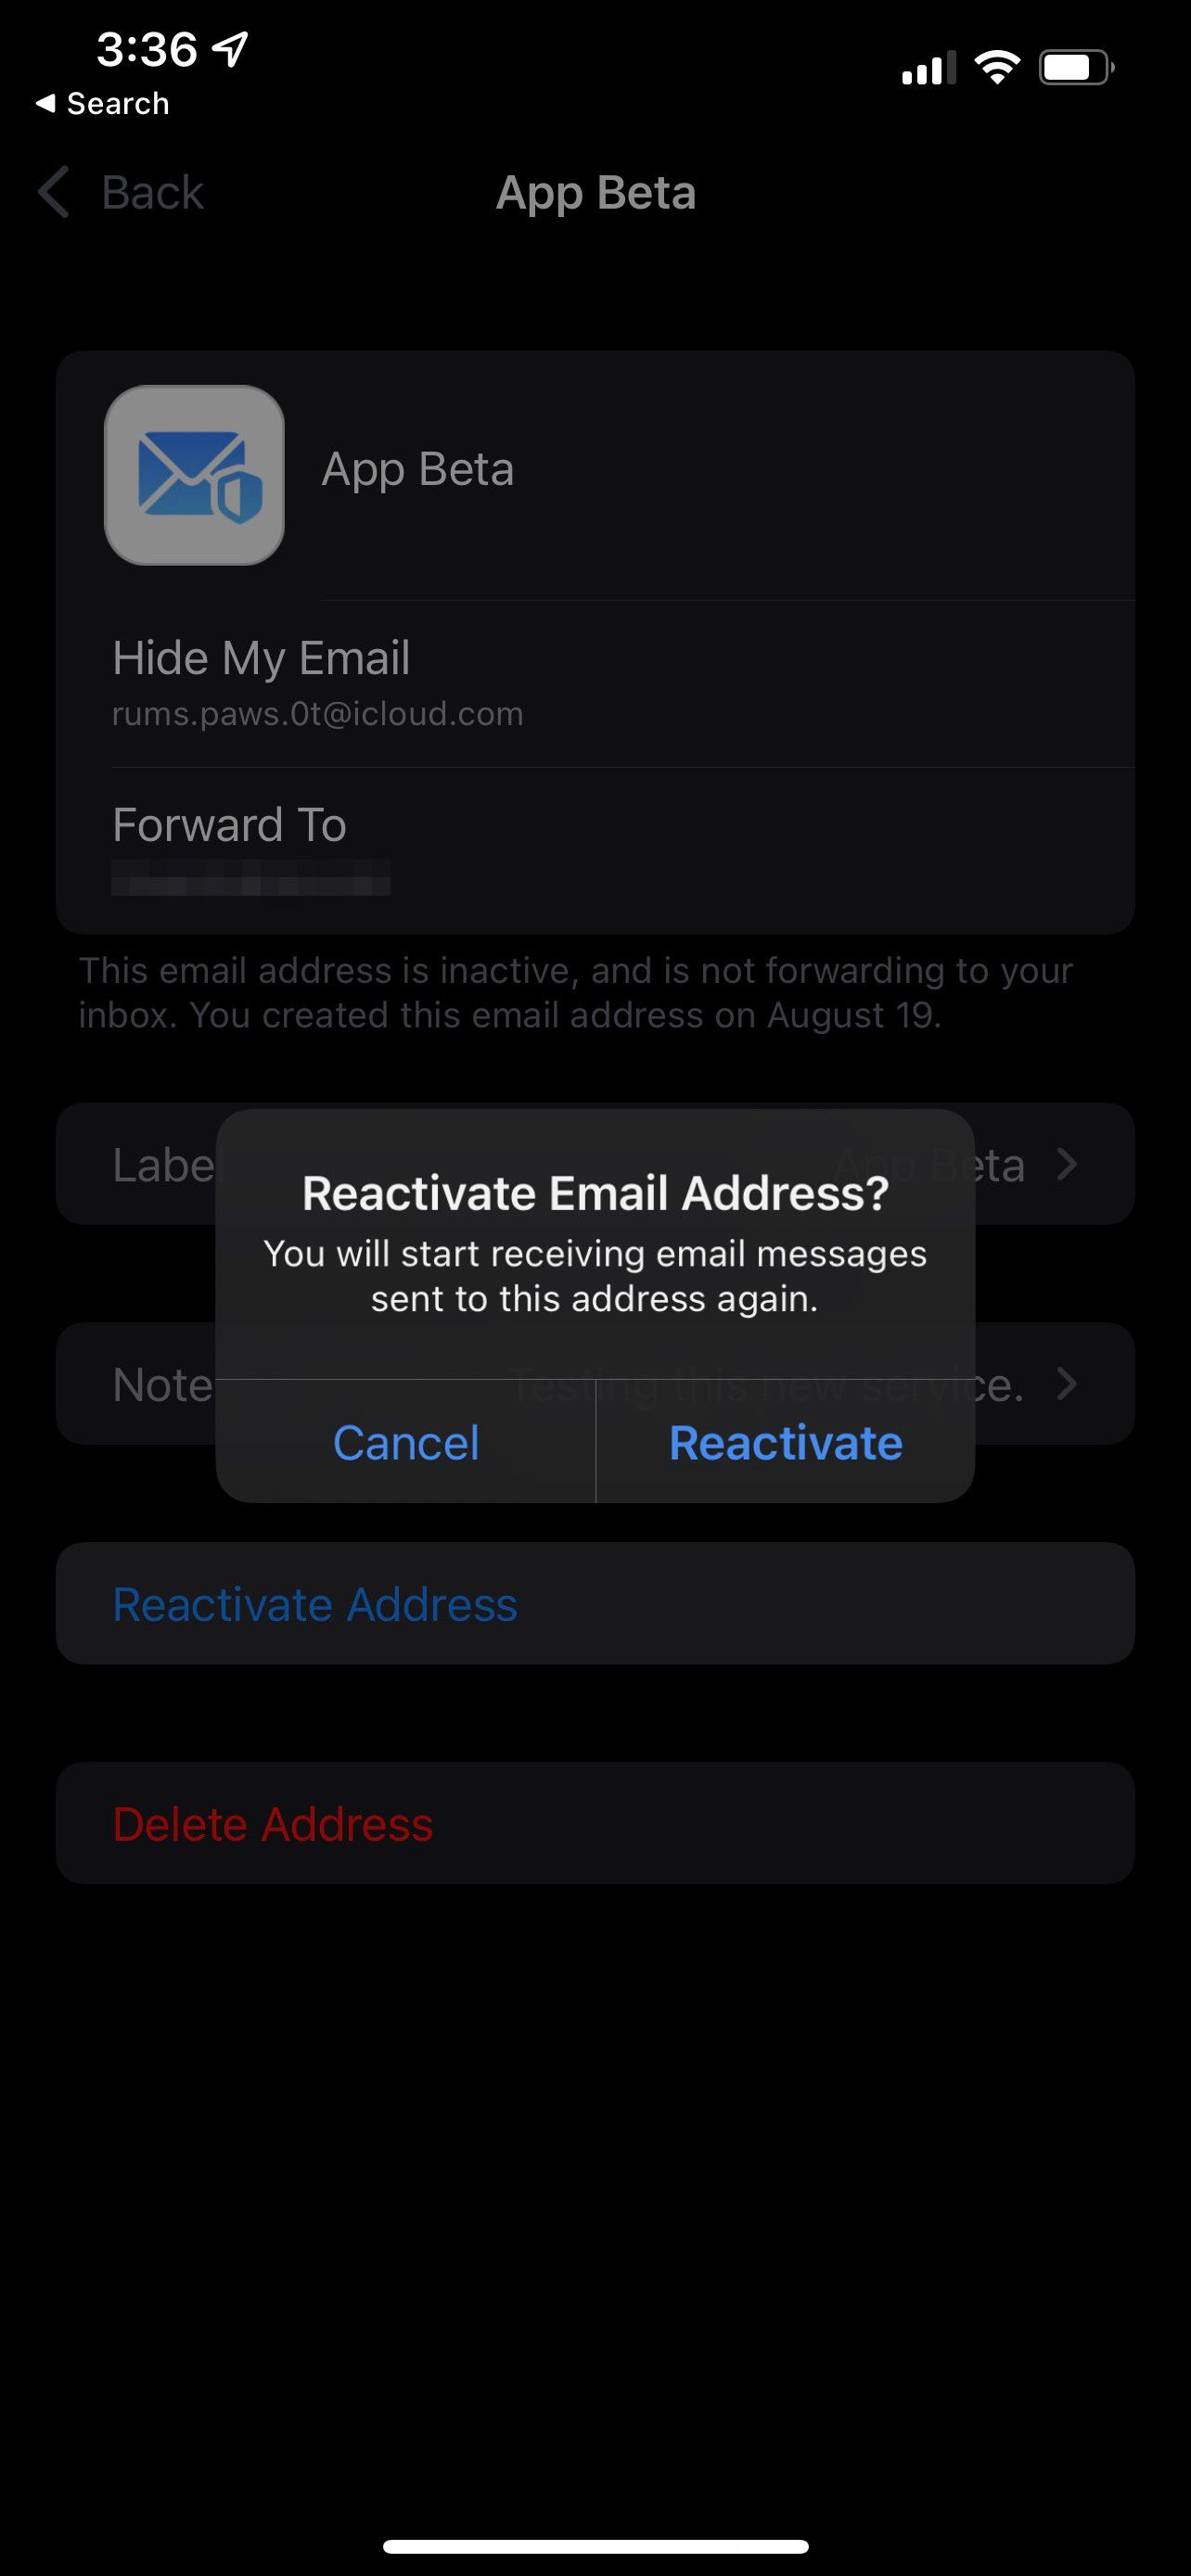 reactivate address confirmation icloud+